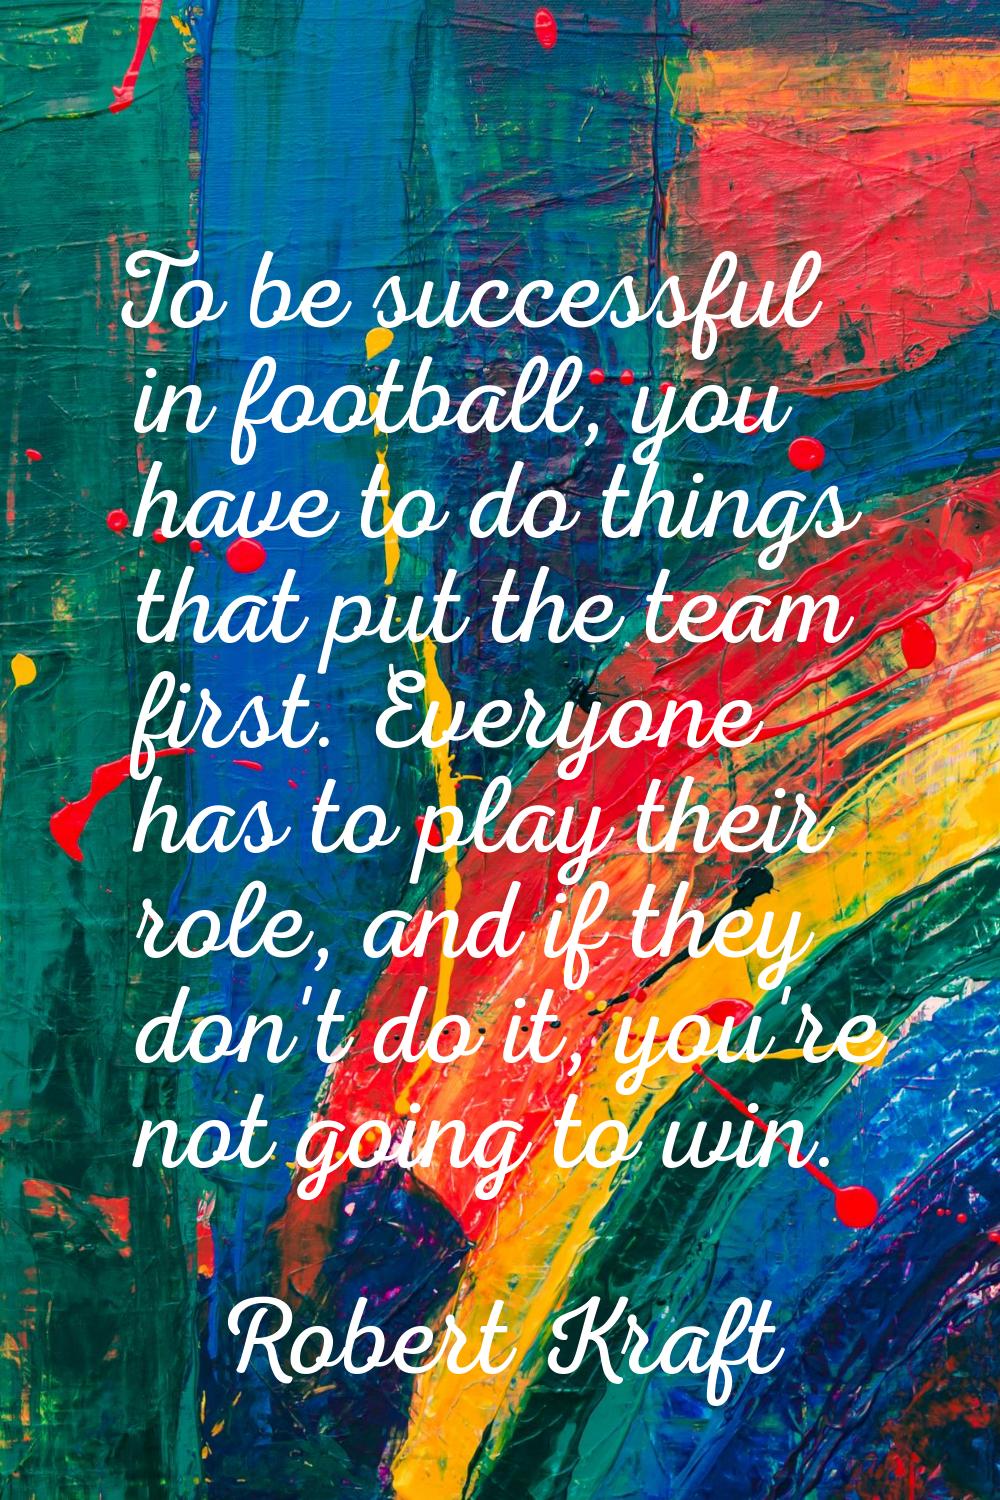 To be successful in football, you have to do things that put the team first. Everyone has to play t